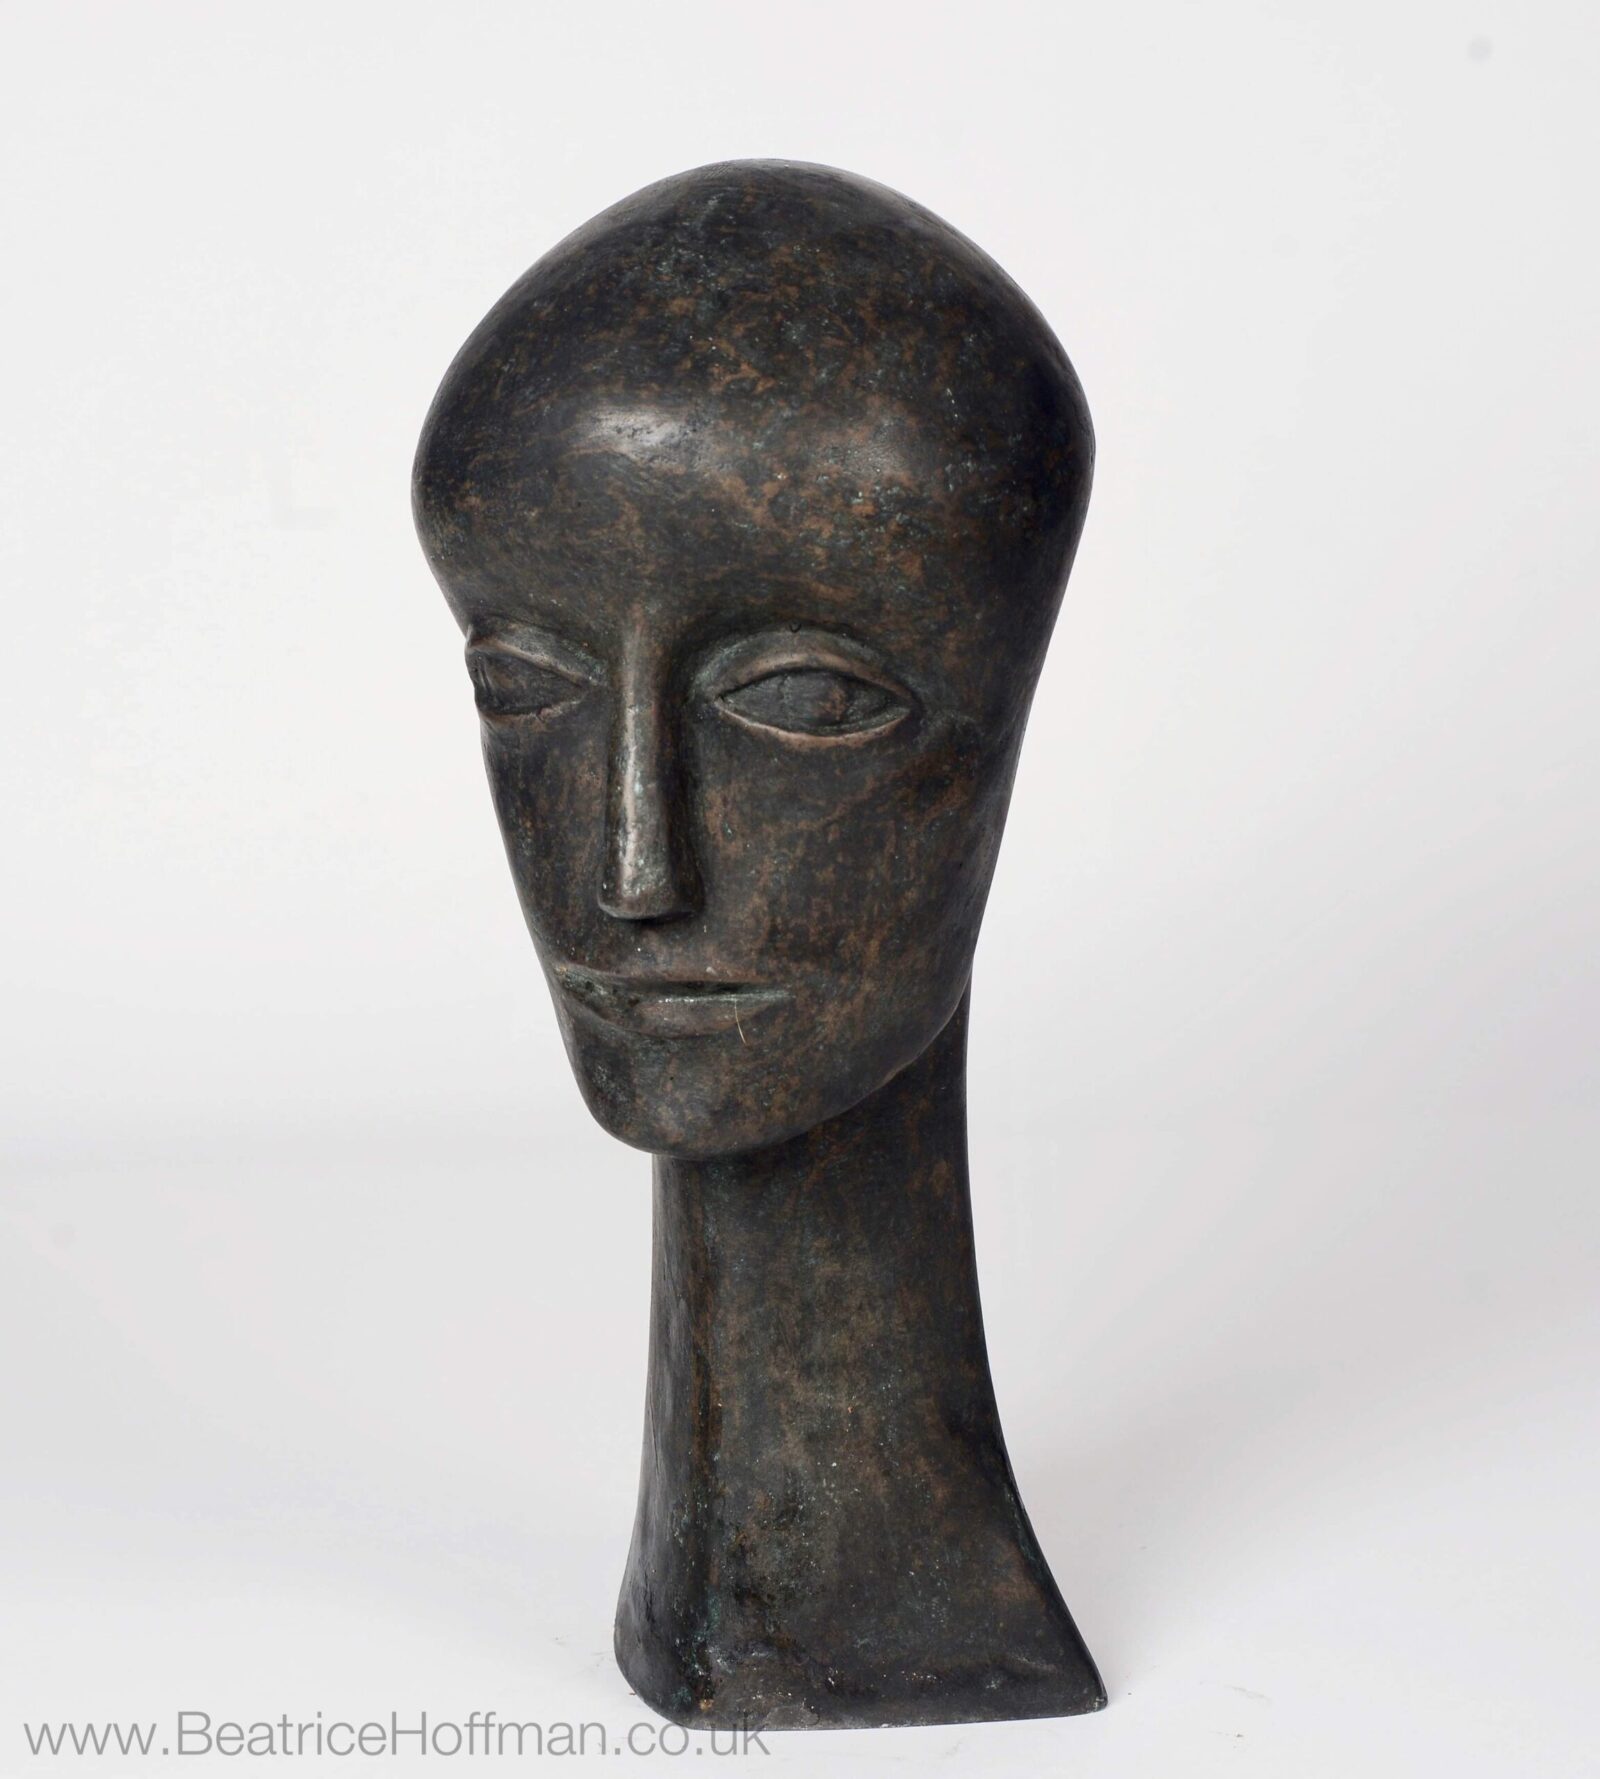 contemporary bronze sculpture of a head based on early medieval church sculpture